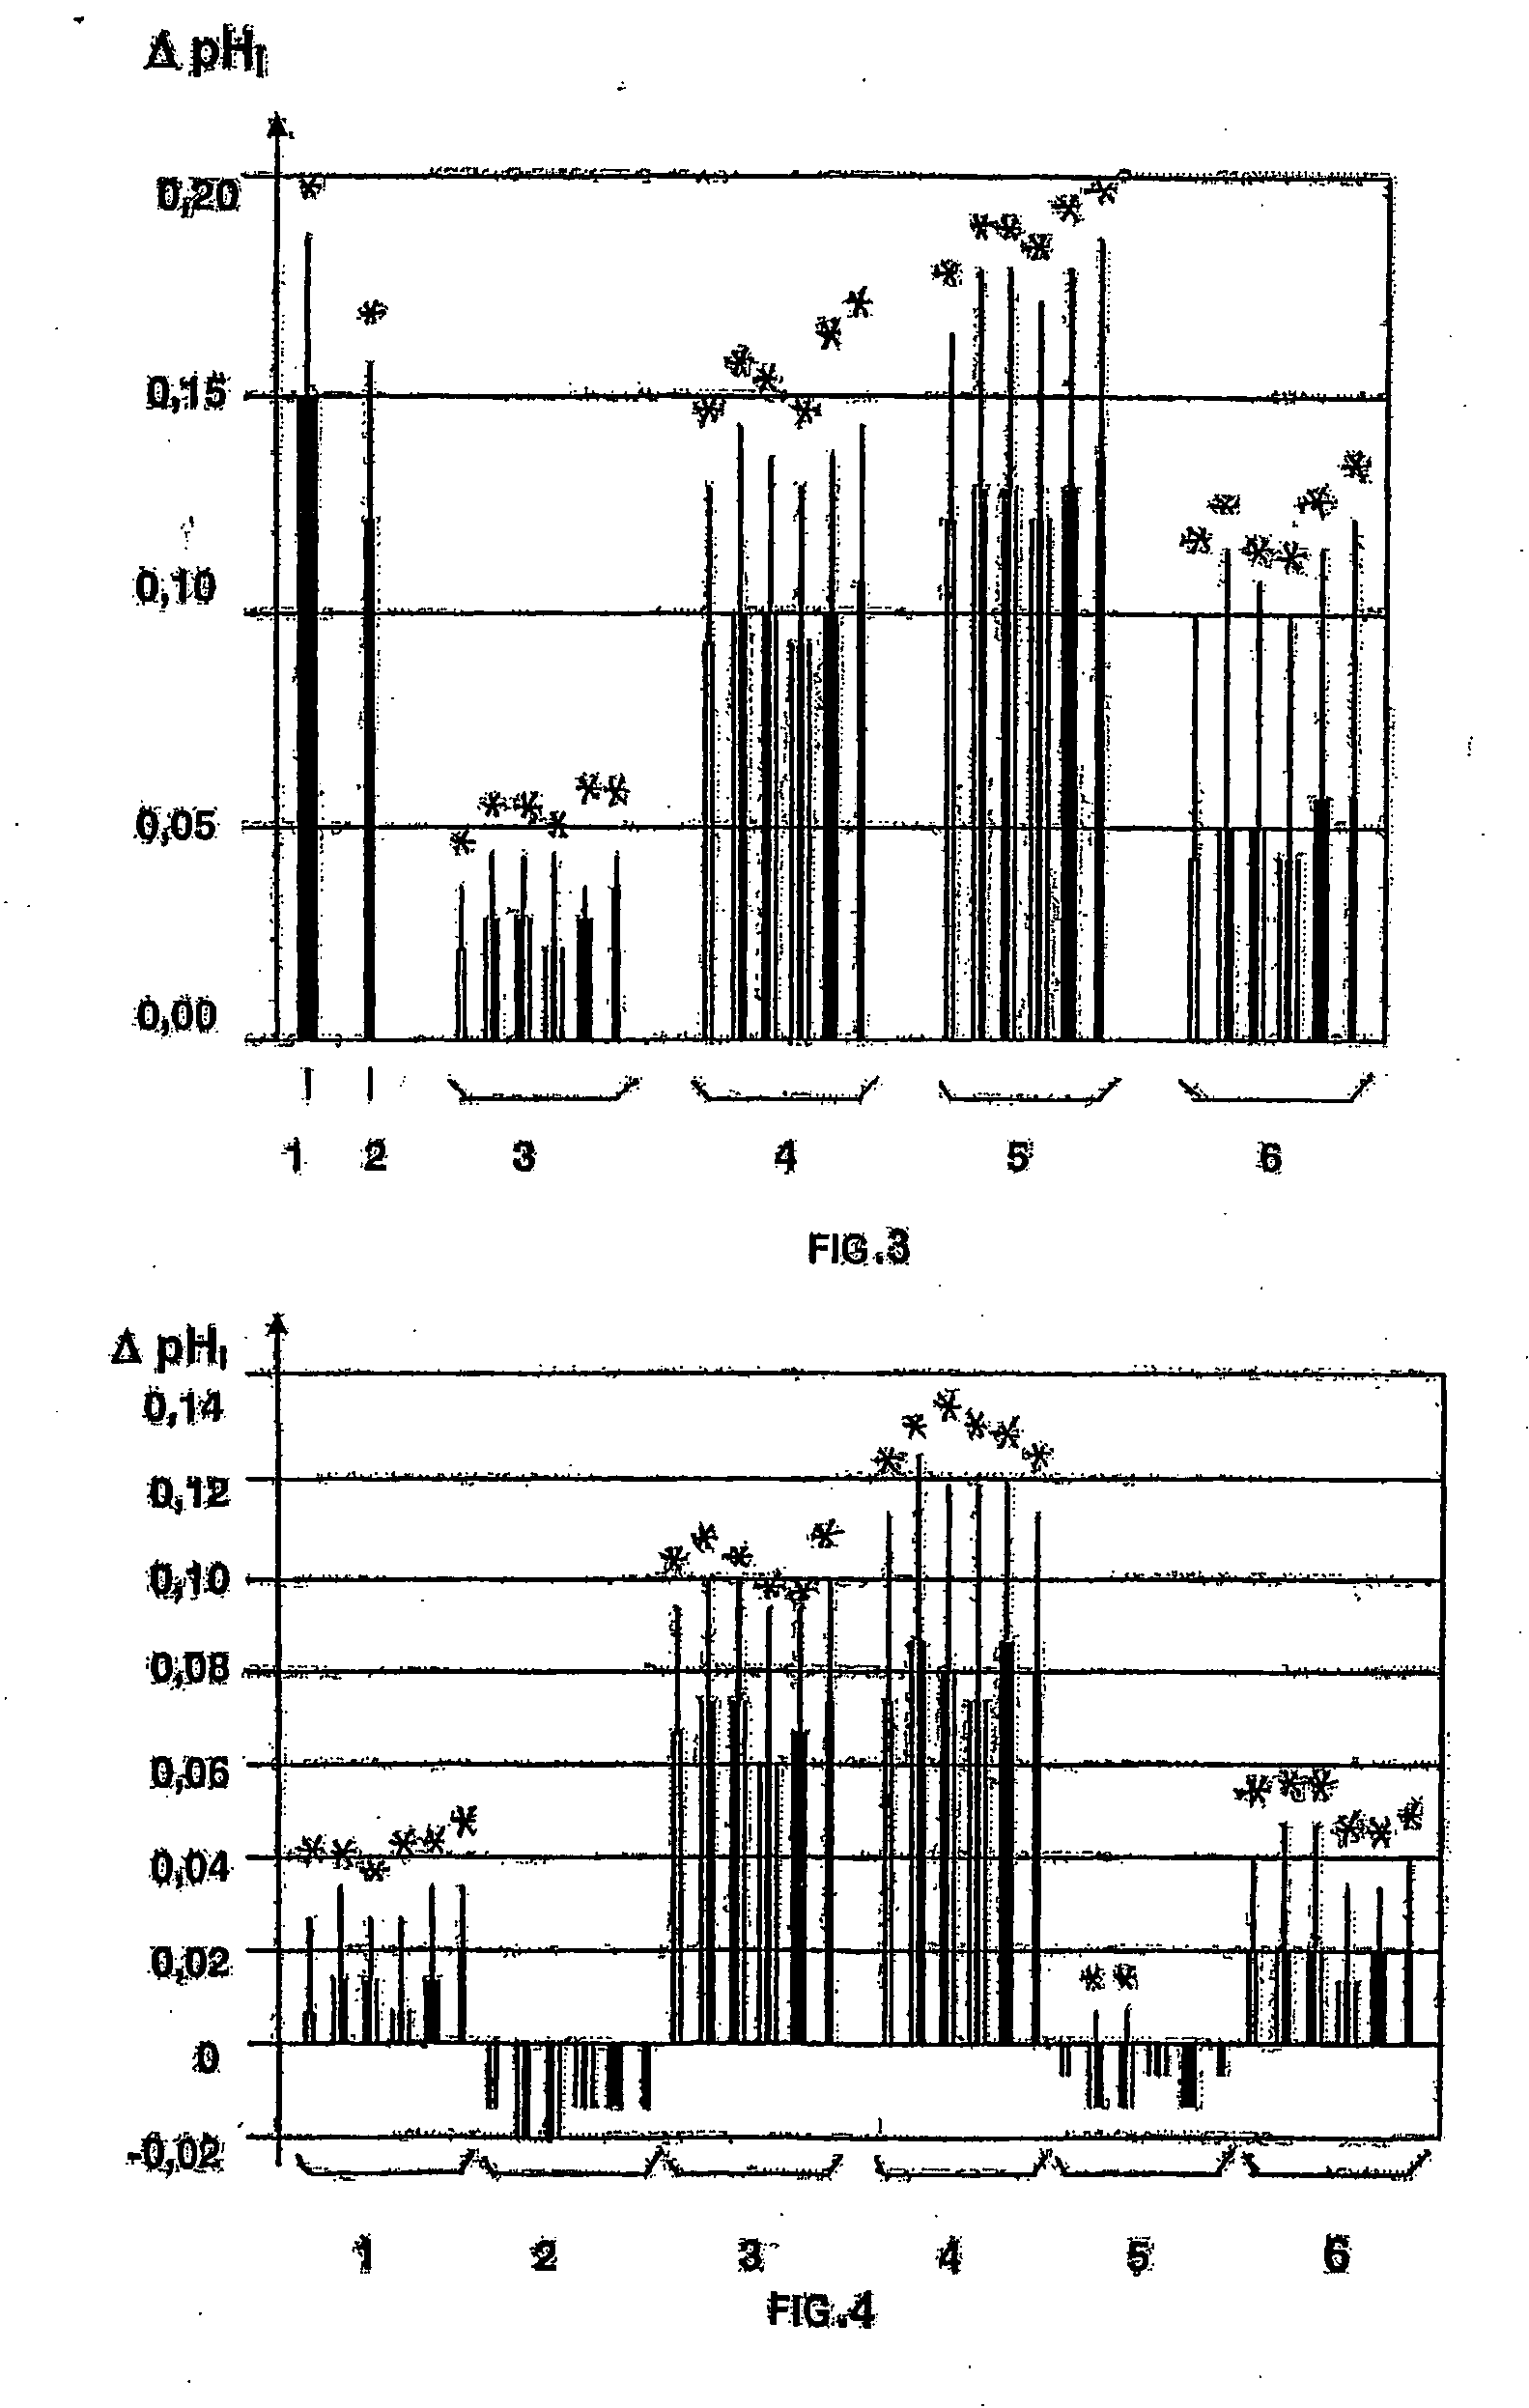 Use of a layer consisting of hydrophobic linear, or two-dimensional polycyclic aromatics as a barrier layer or an encapsulation and electric components constructed with a layer of this type and comprising organic polymers